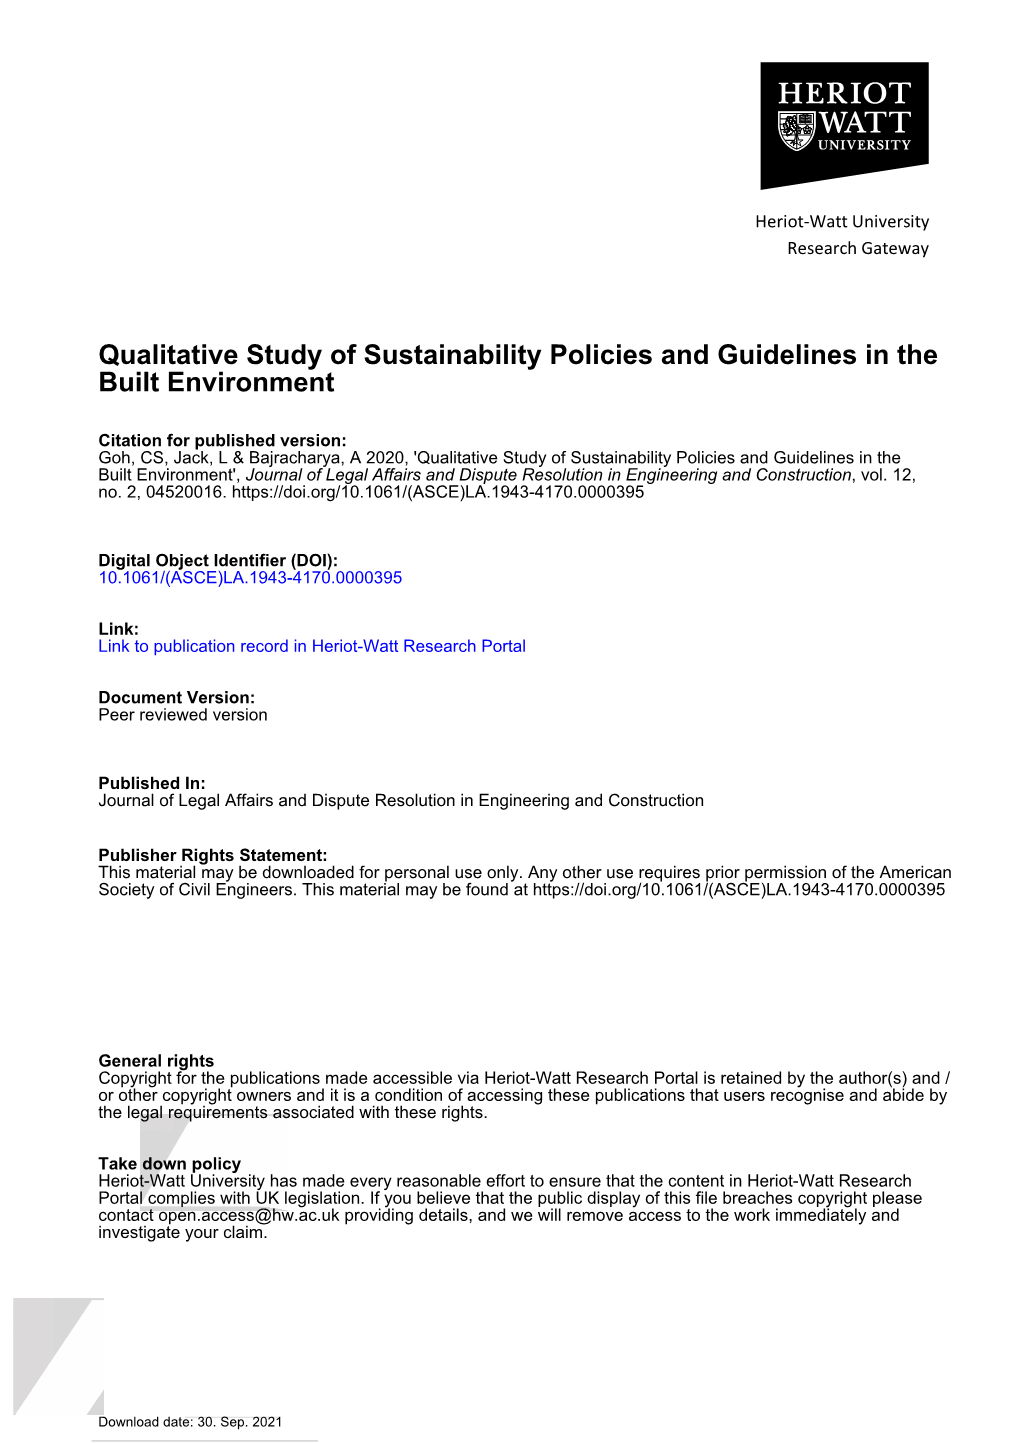 Qualitative Study of Sustainability Policies and Guidelines in the Built Environment